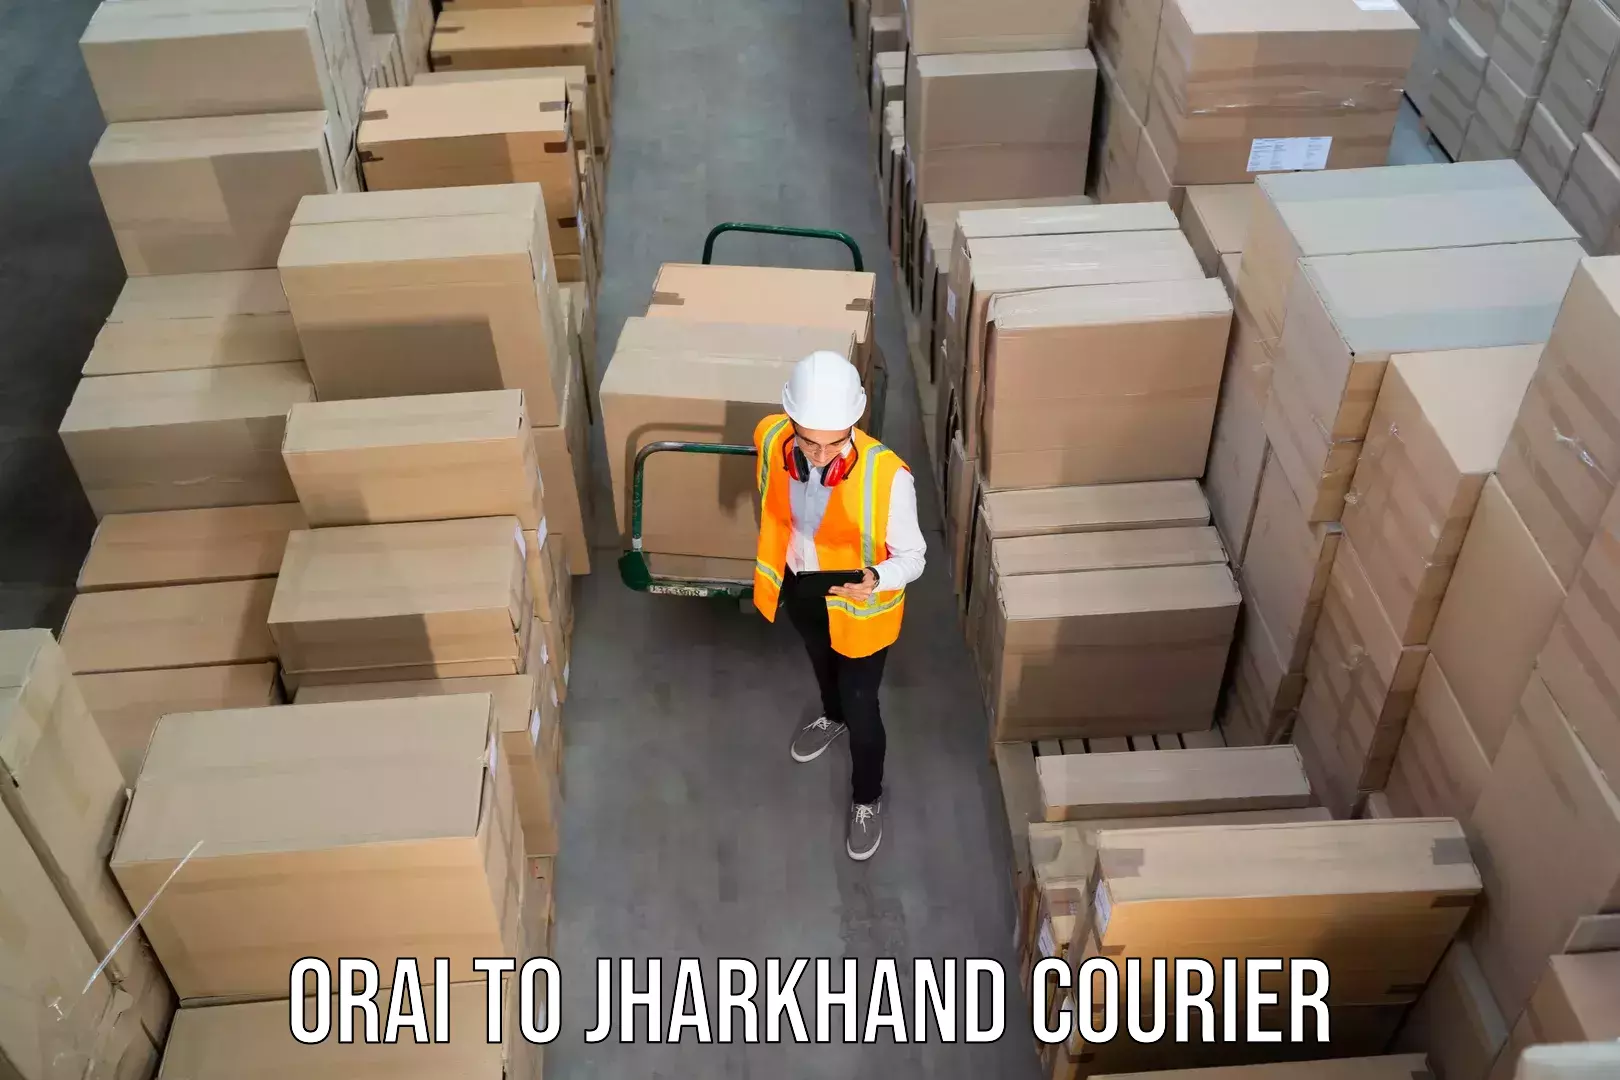 Easy access courier services Orai to Peterbar